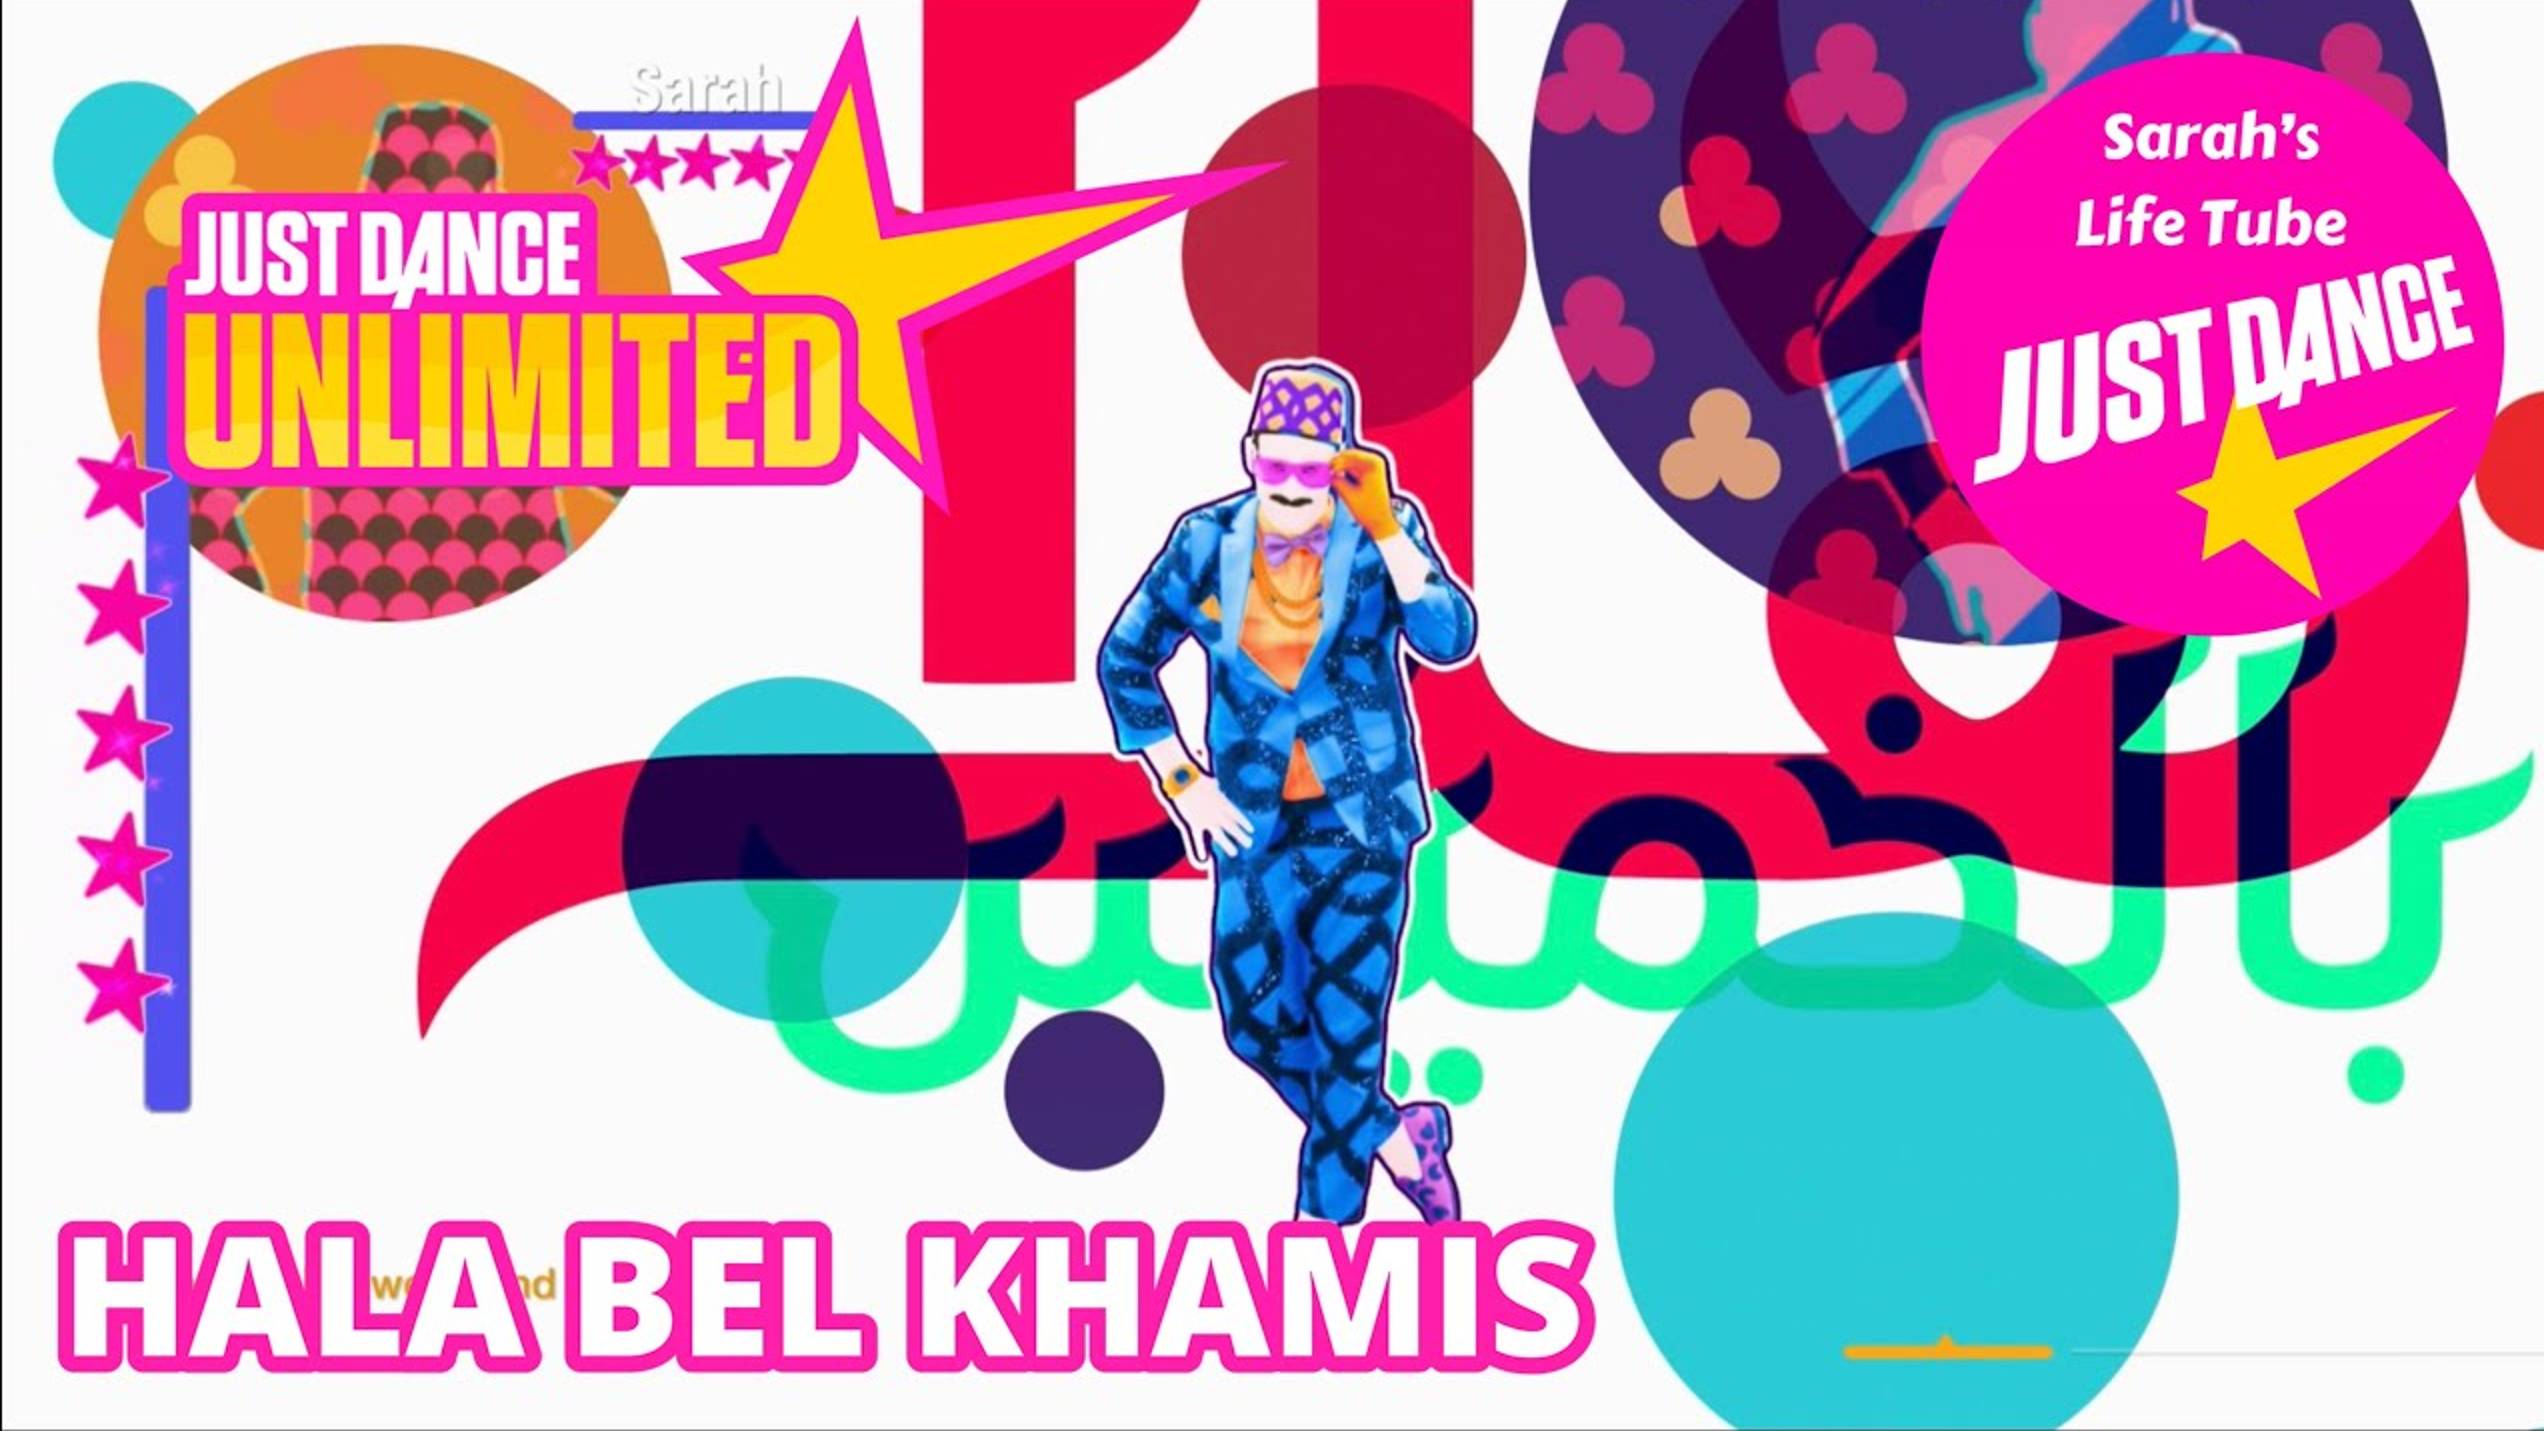 Just Dance Unlimited: Hala Bel Khamis by Maan Barghouth